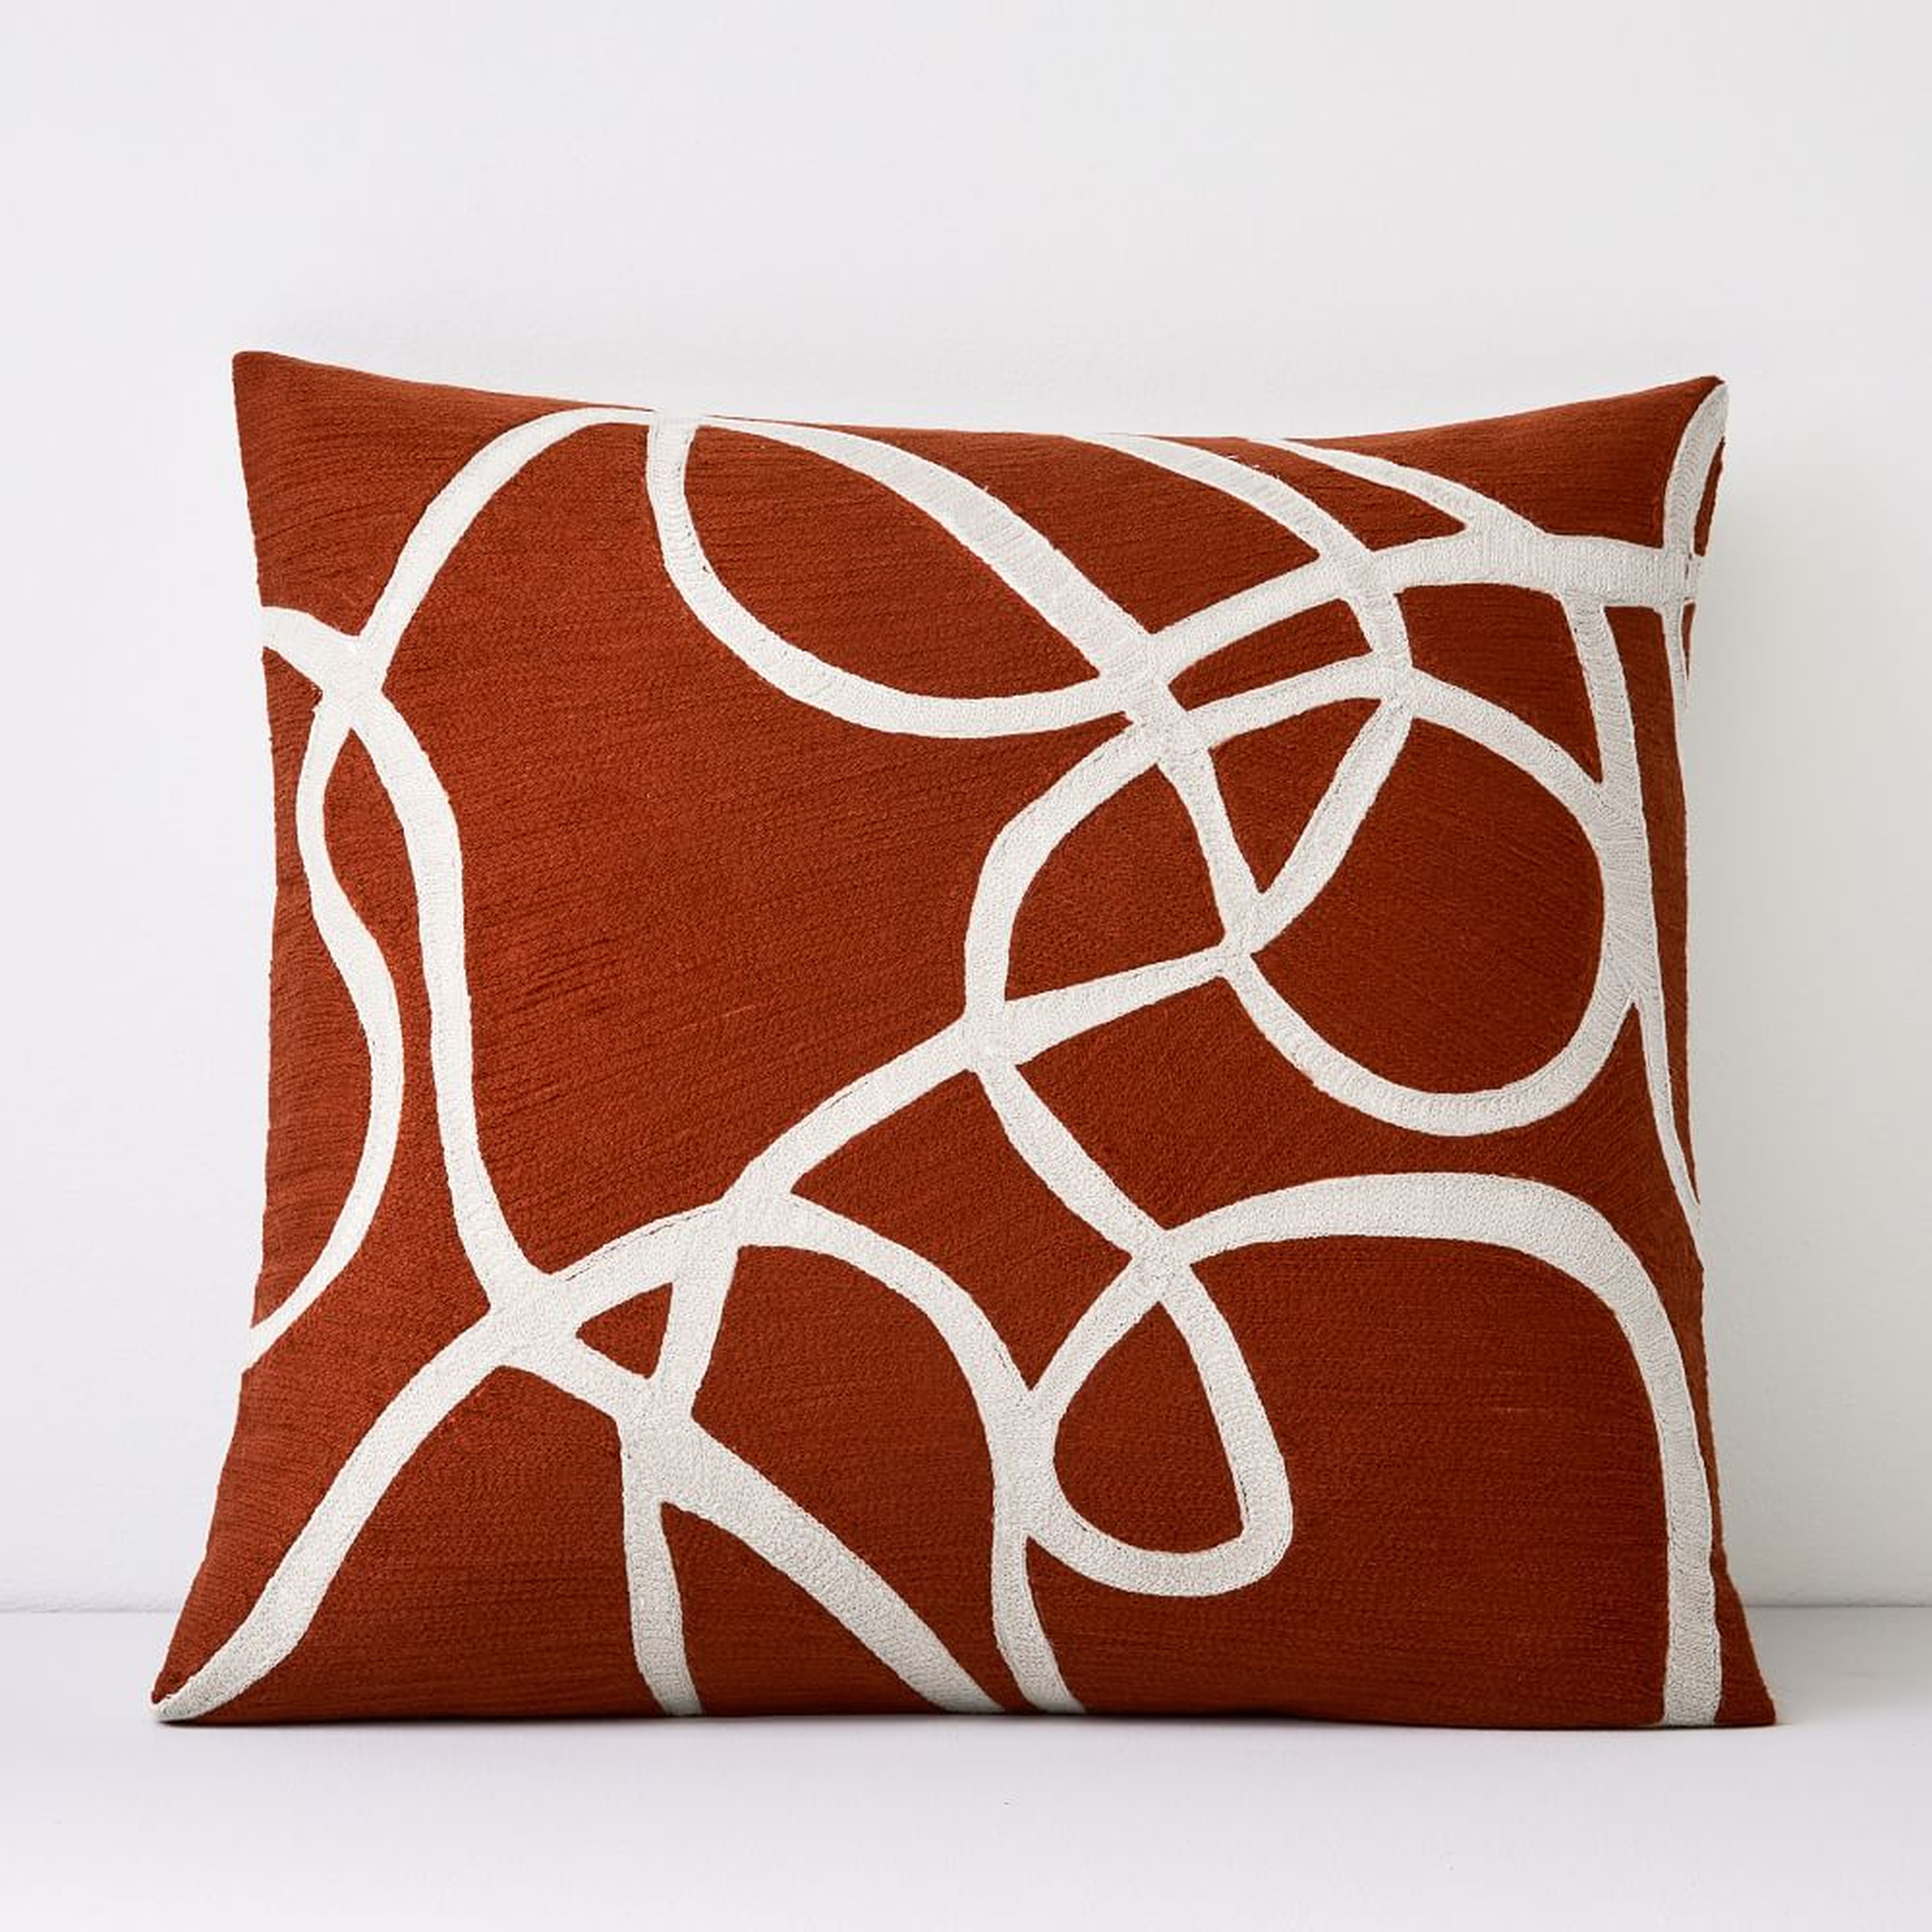 Crewel Rope Pillow Cover, Copper, 24"x24" - West Elm